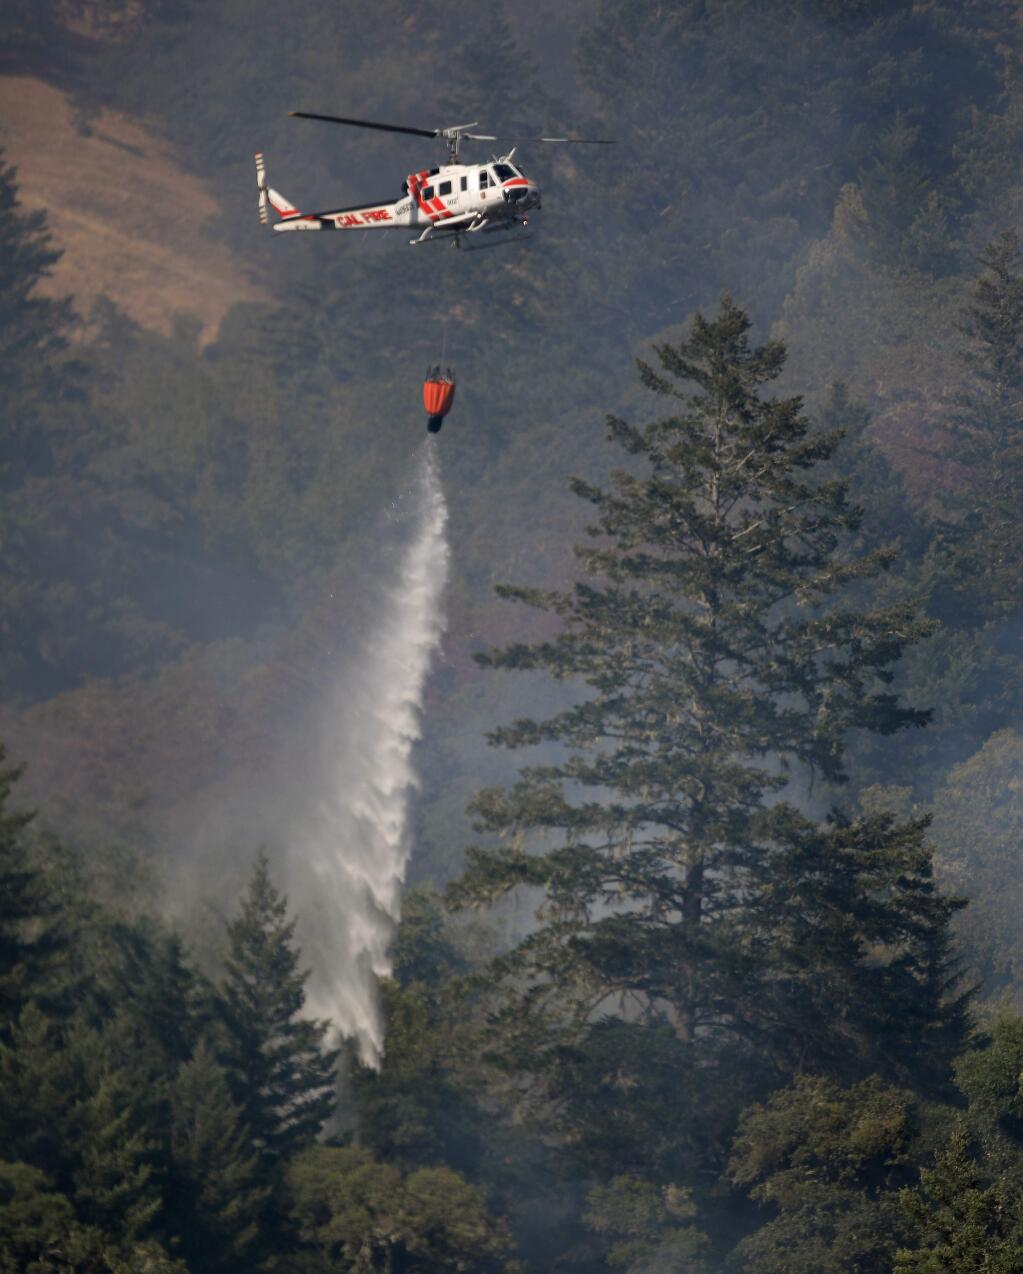 The Howard Forest, Cal Fire helicopter is used to control the Vineyard fire, Tuesday, June 9, 2020 in Mendocino County. (Kent Porter / The Press Democrat) 2020